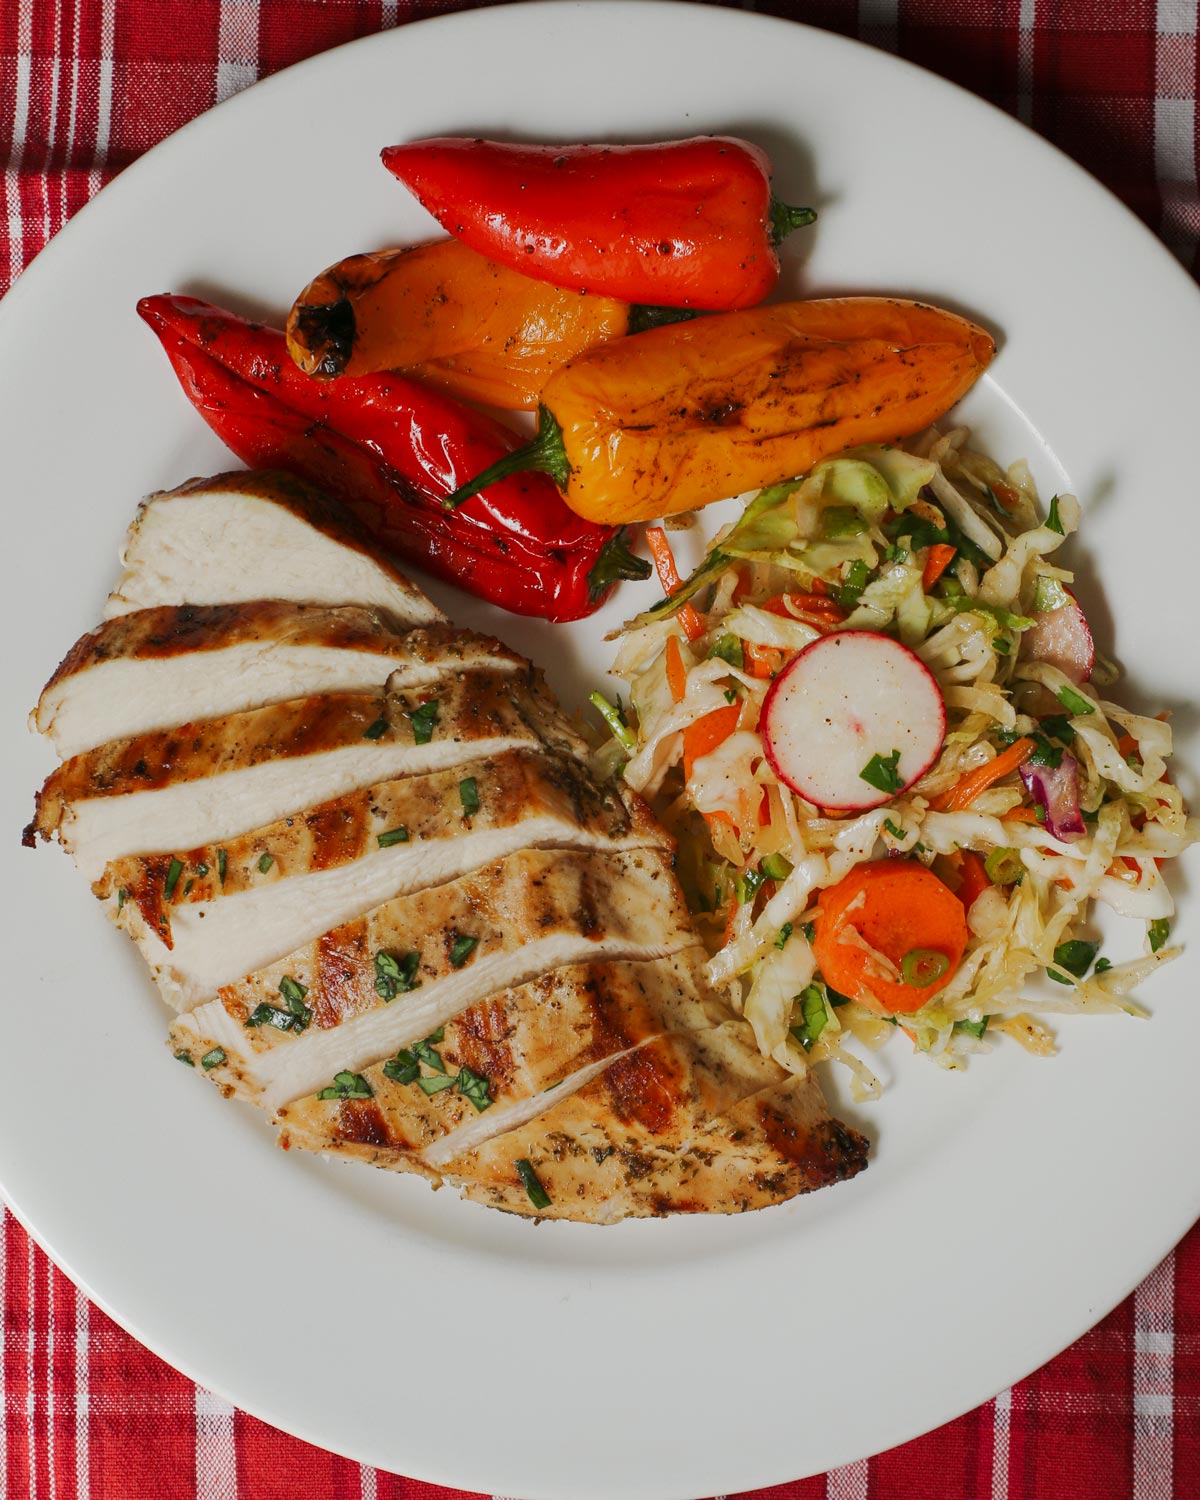 white dinner plate with grilled peppers, coleslaw, and sliced chicken breast on a red plaid cloth.